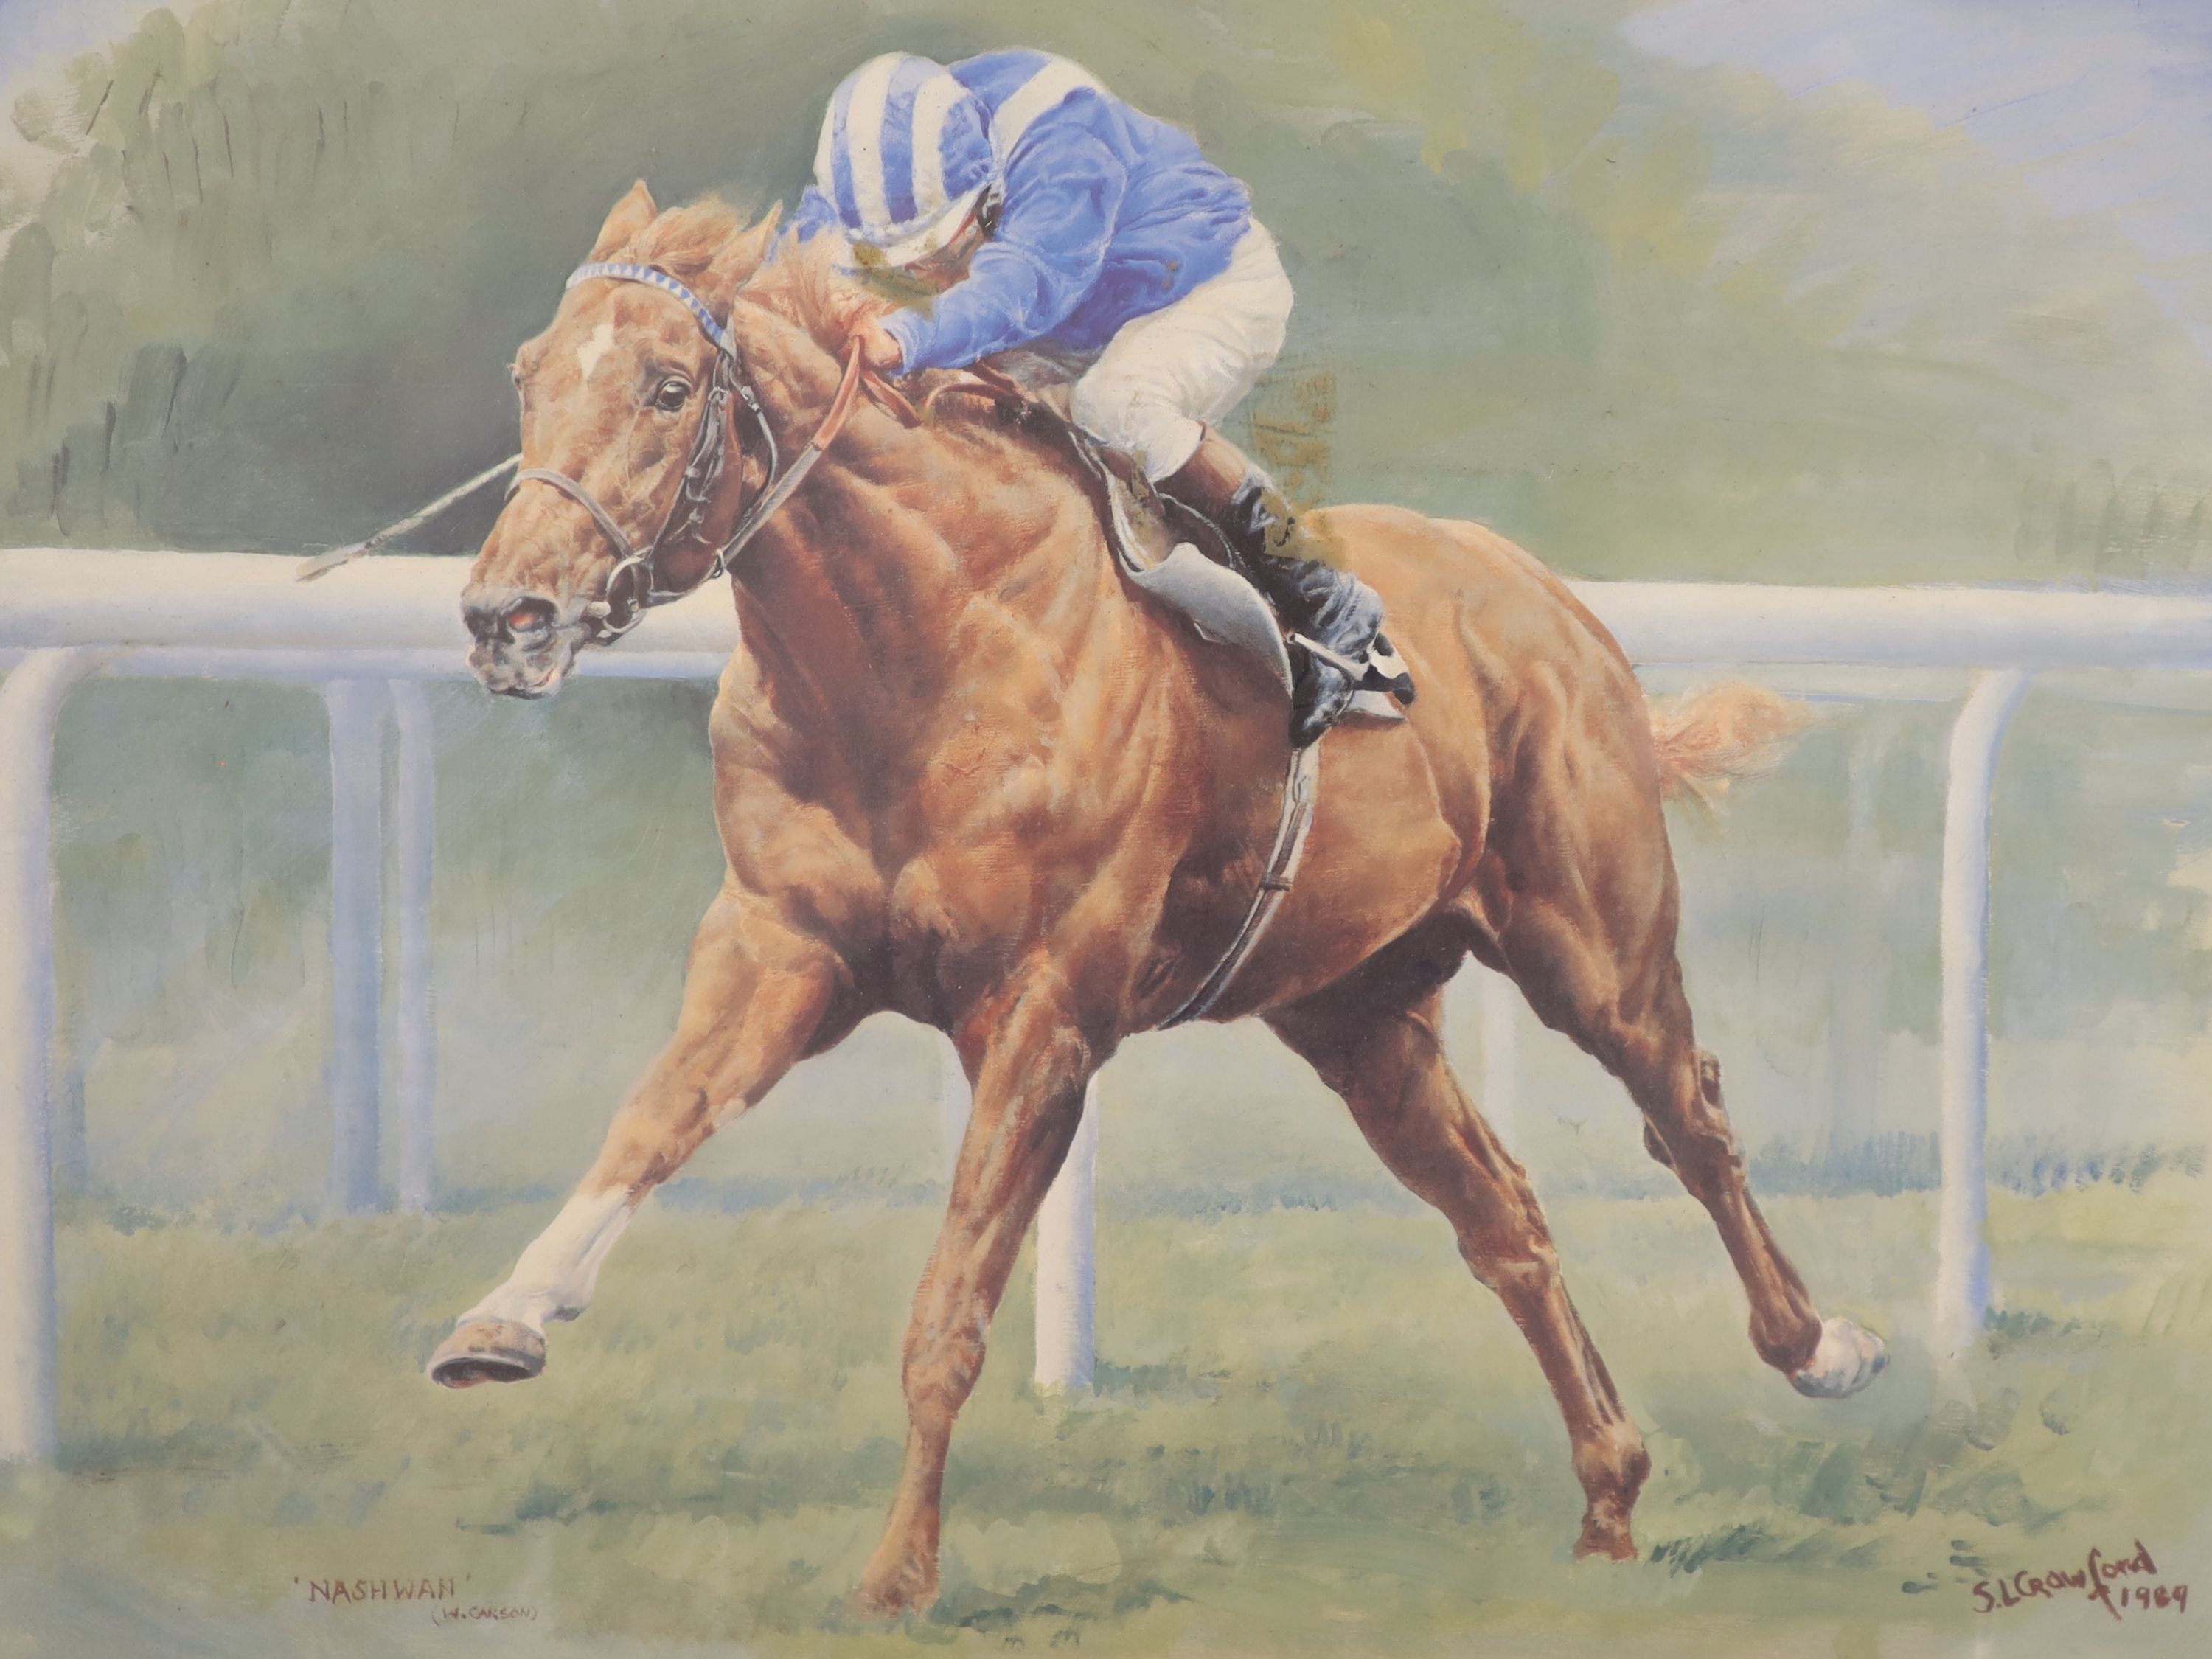 S.L. Crawford, limited edition print, Nashwan, signed by the jockey, 50 x 65cm and a photograph of a horse